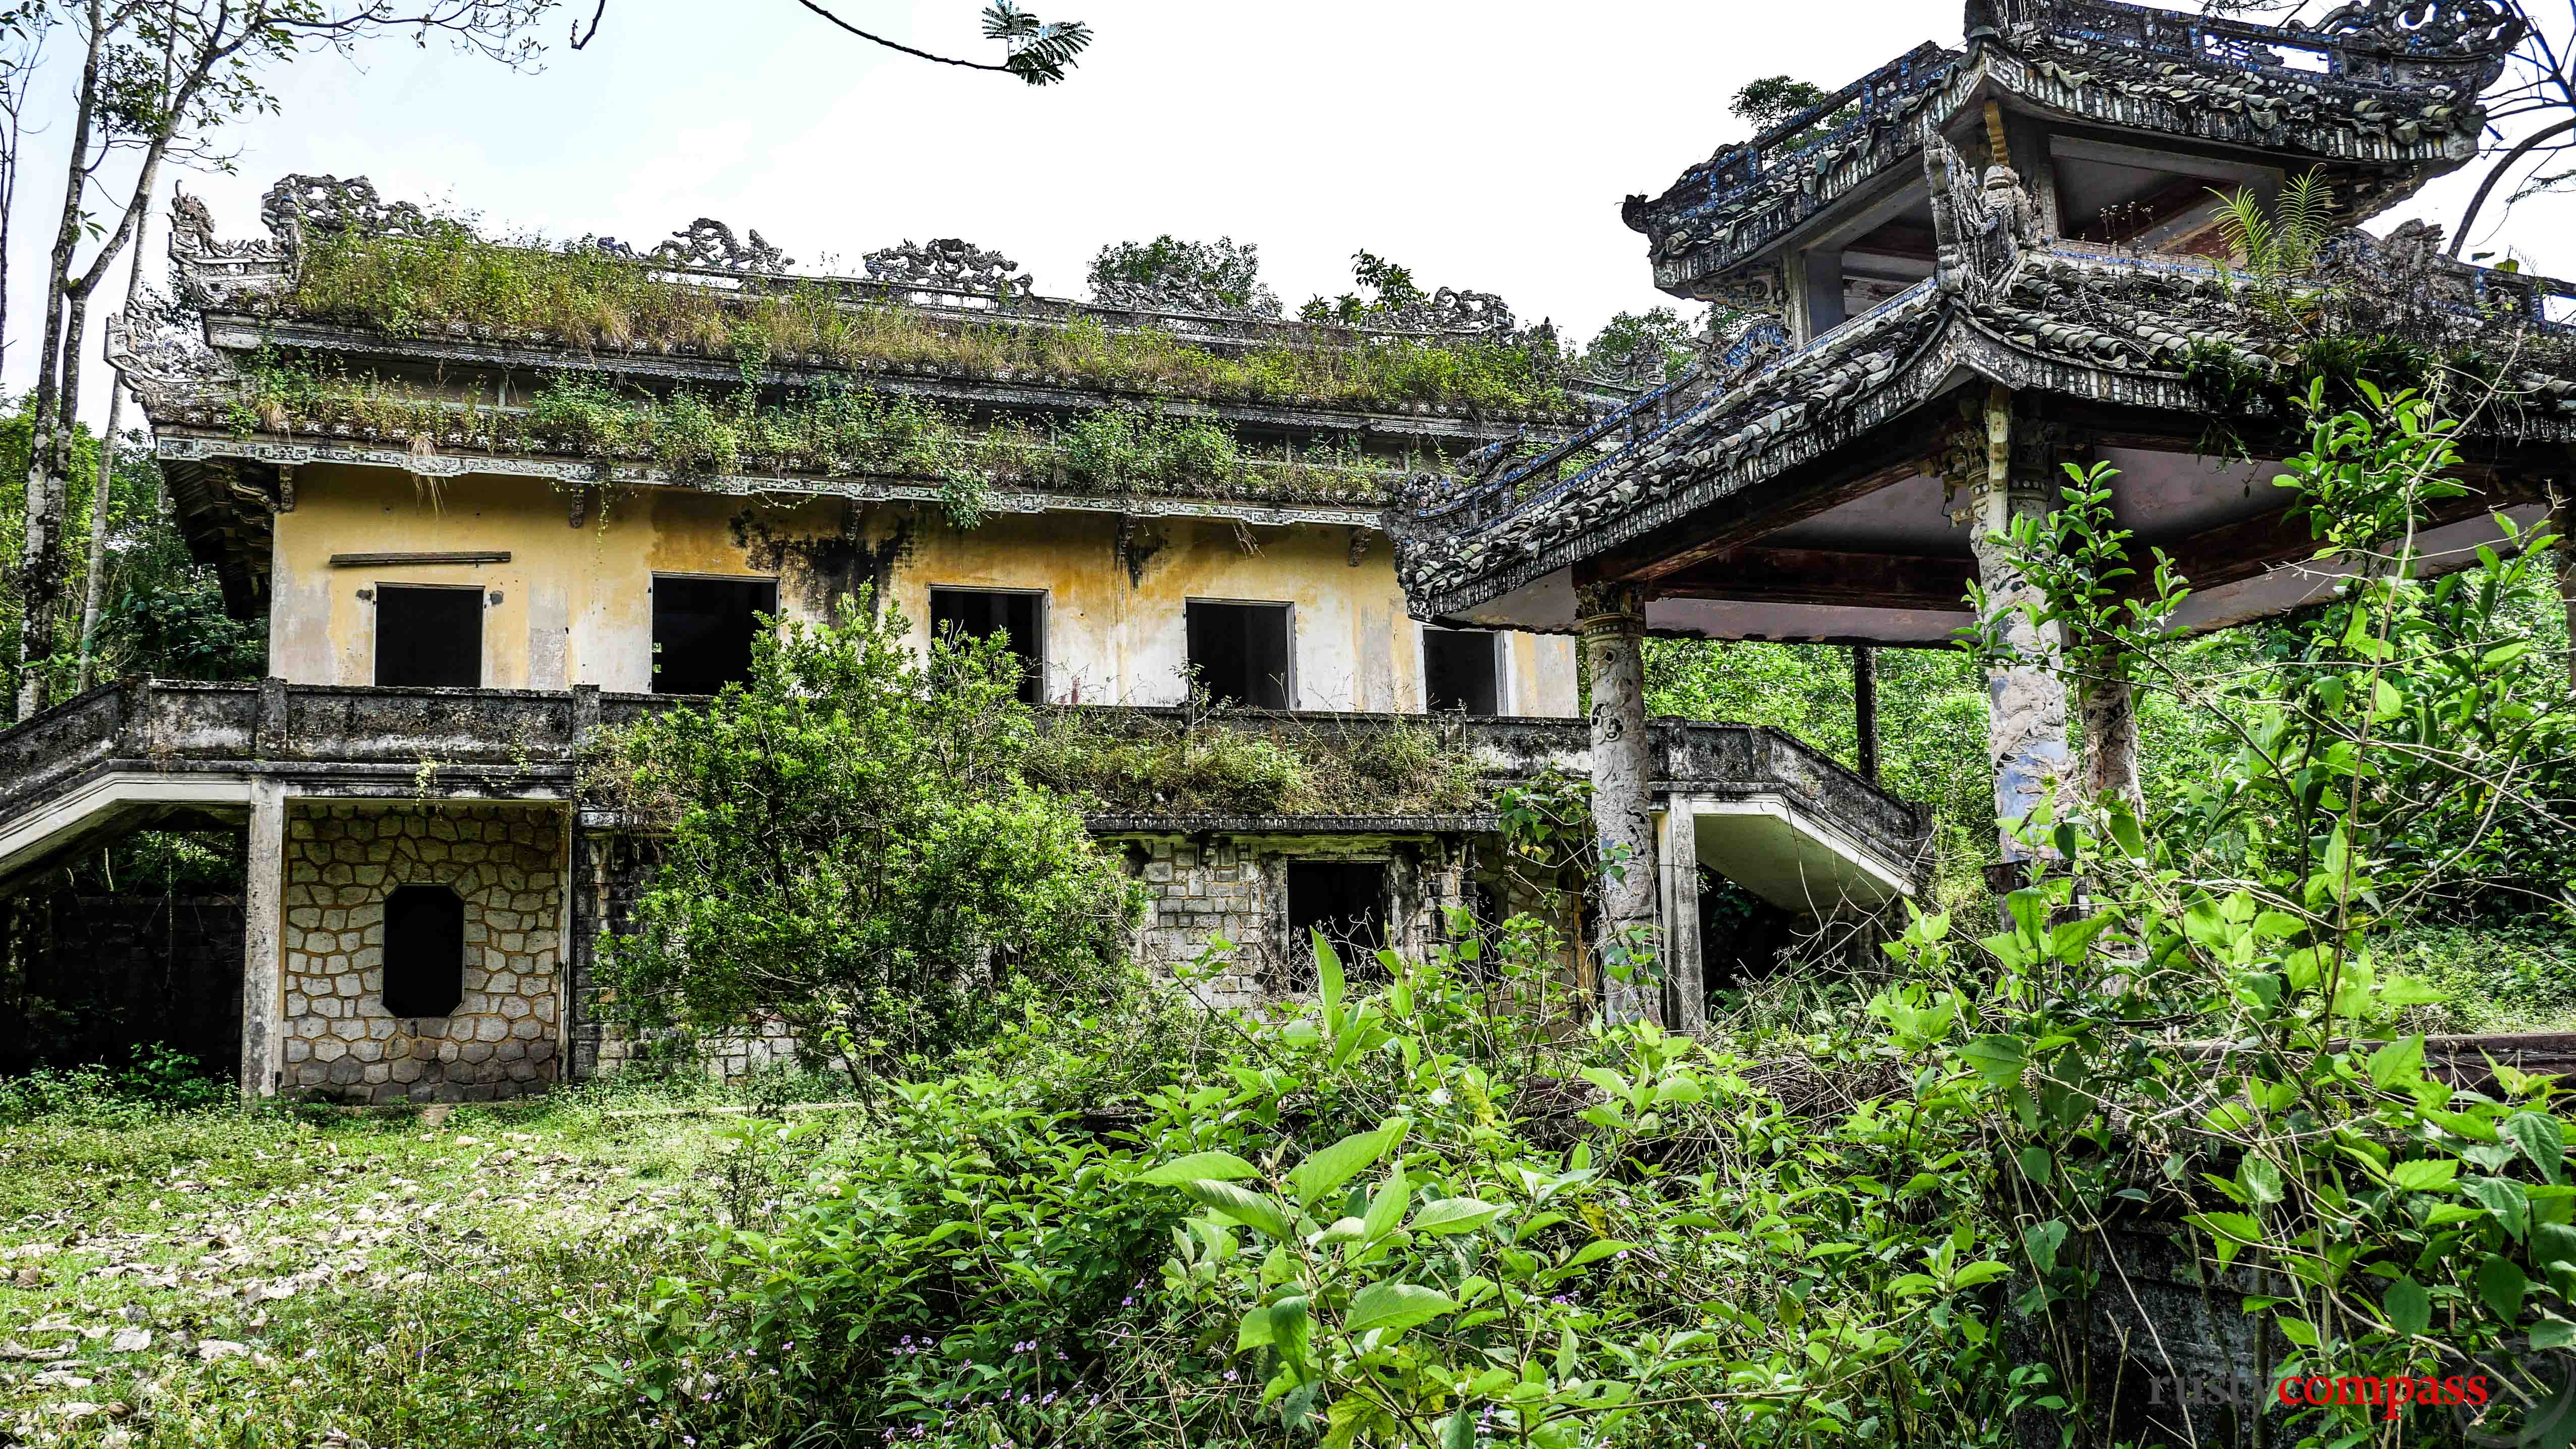 Ngo Dinh Can's spooky abandoned mansion - Hue